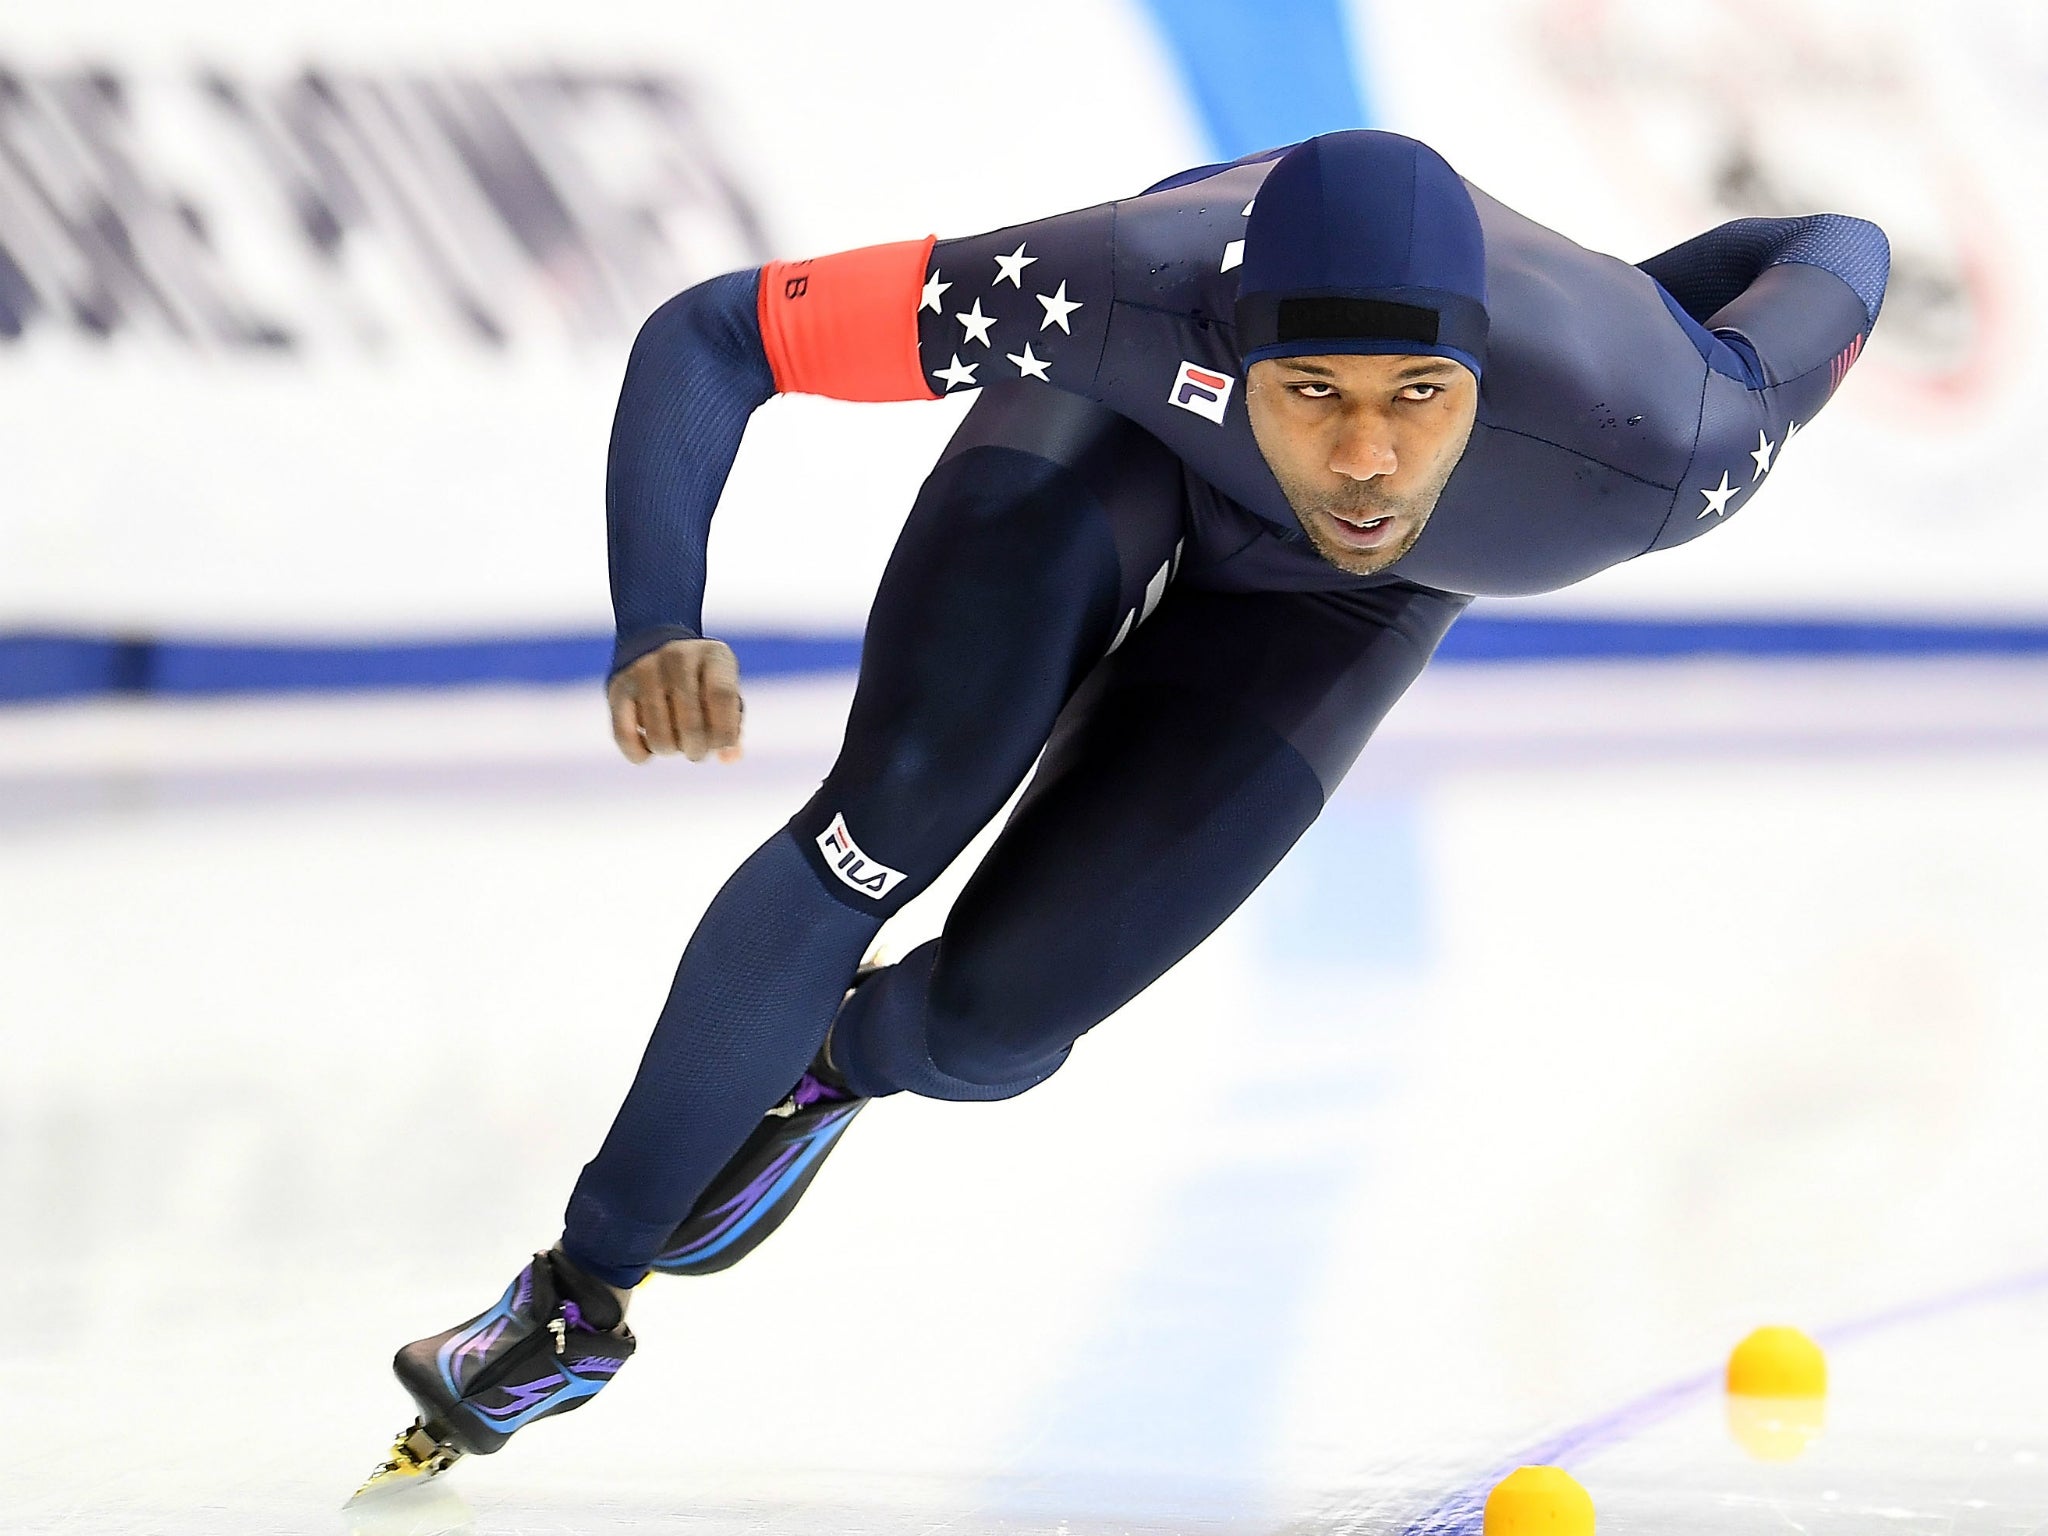 Shani Davis refused to attend the opening ceremony after being overlooked for the flag bearer role